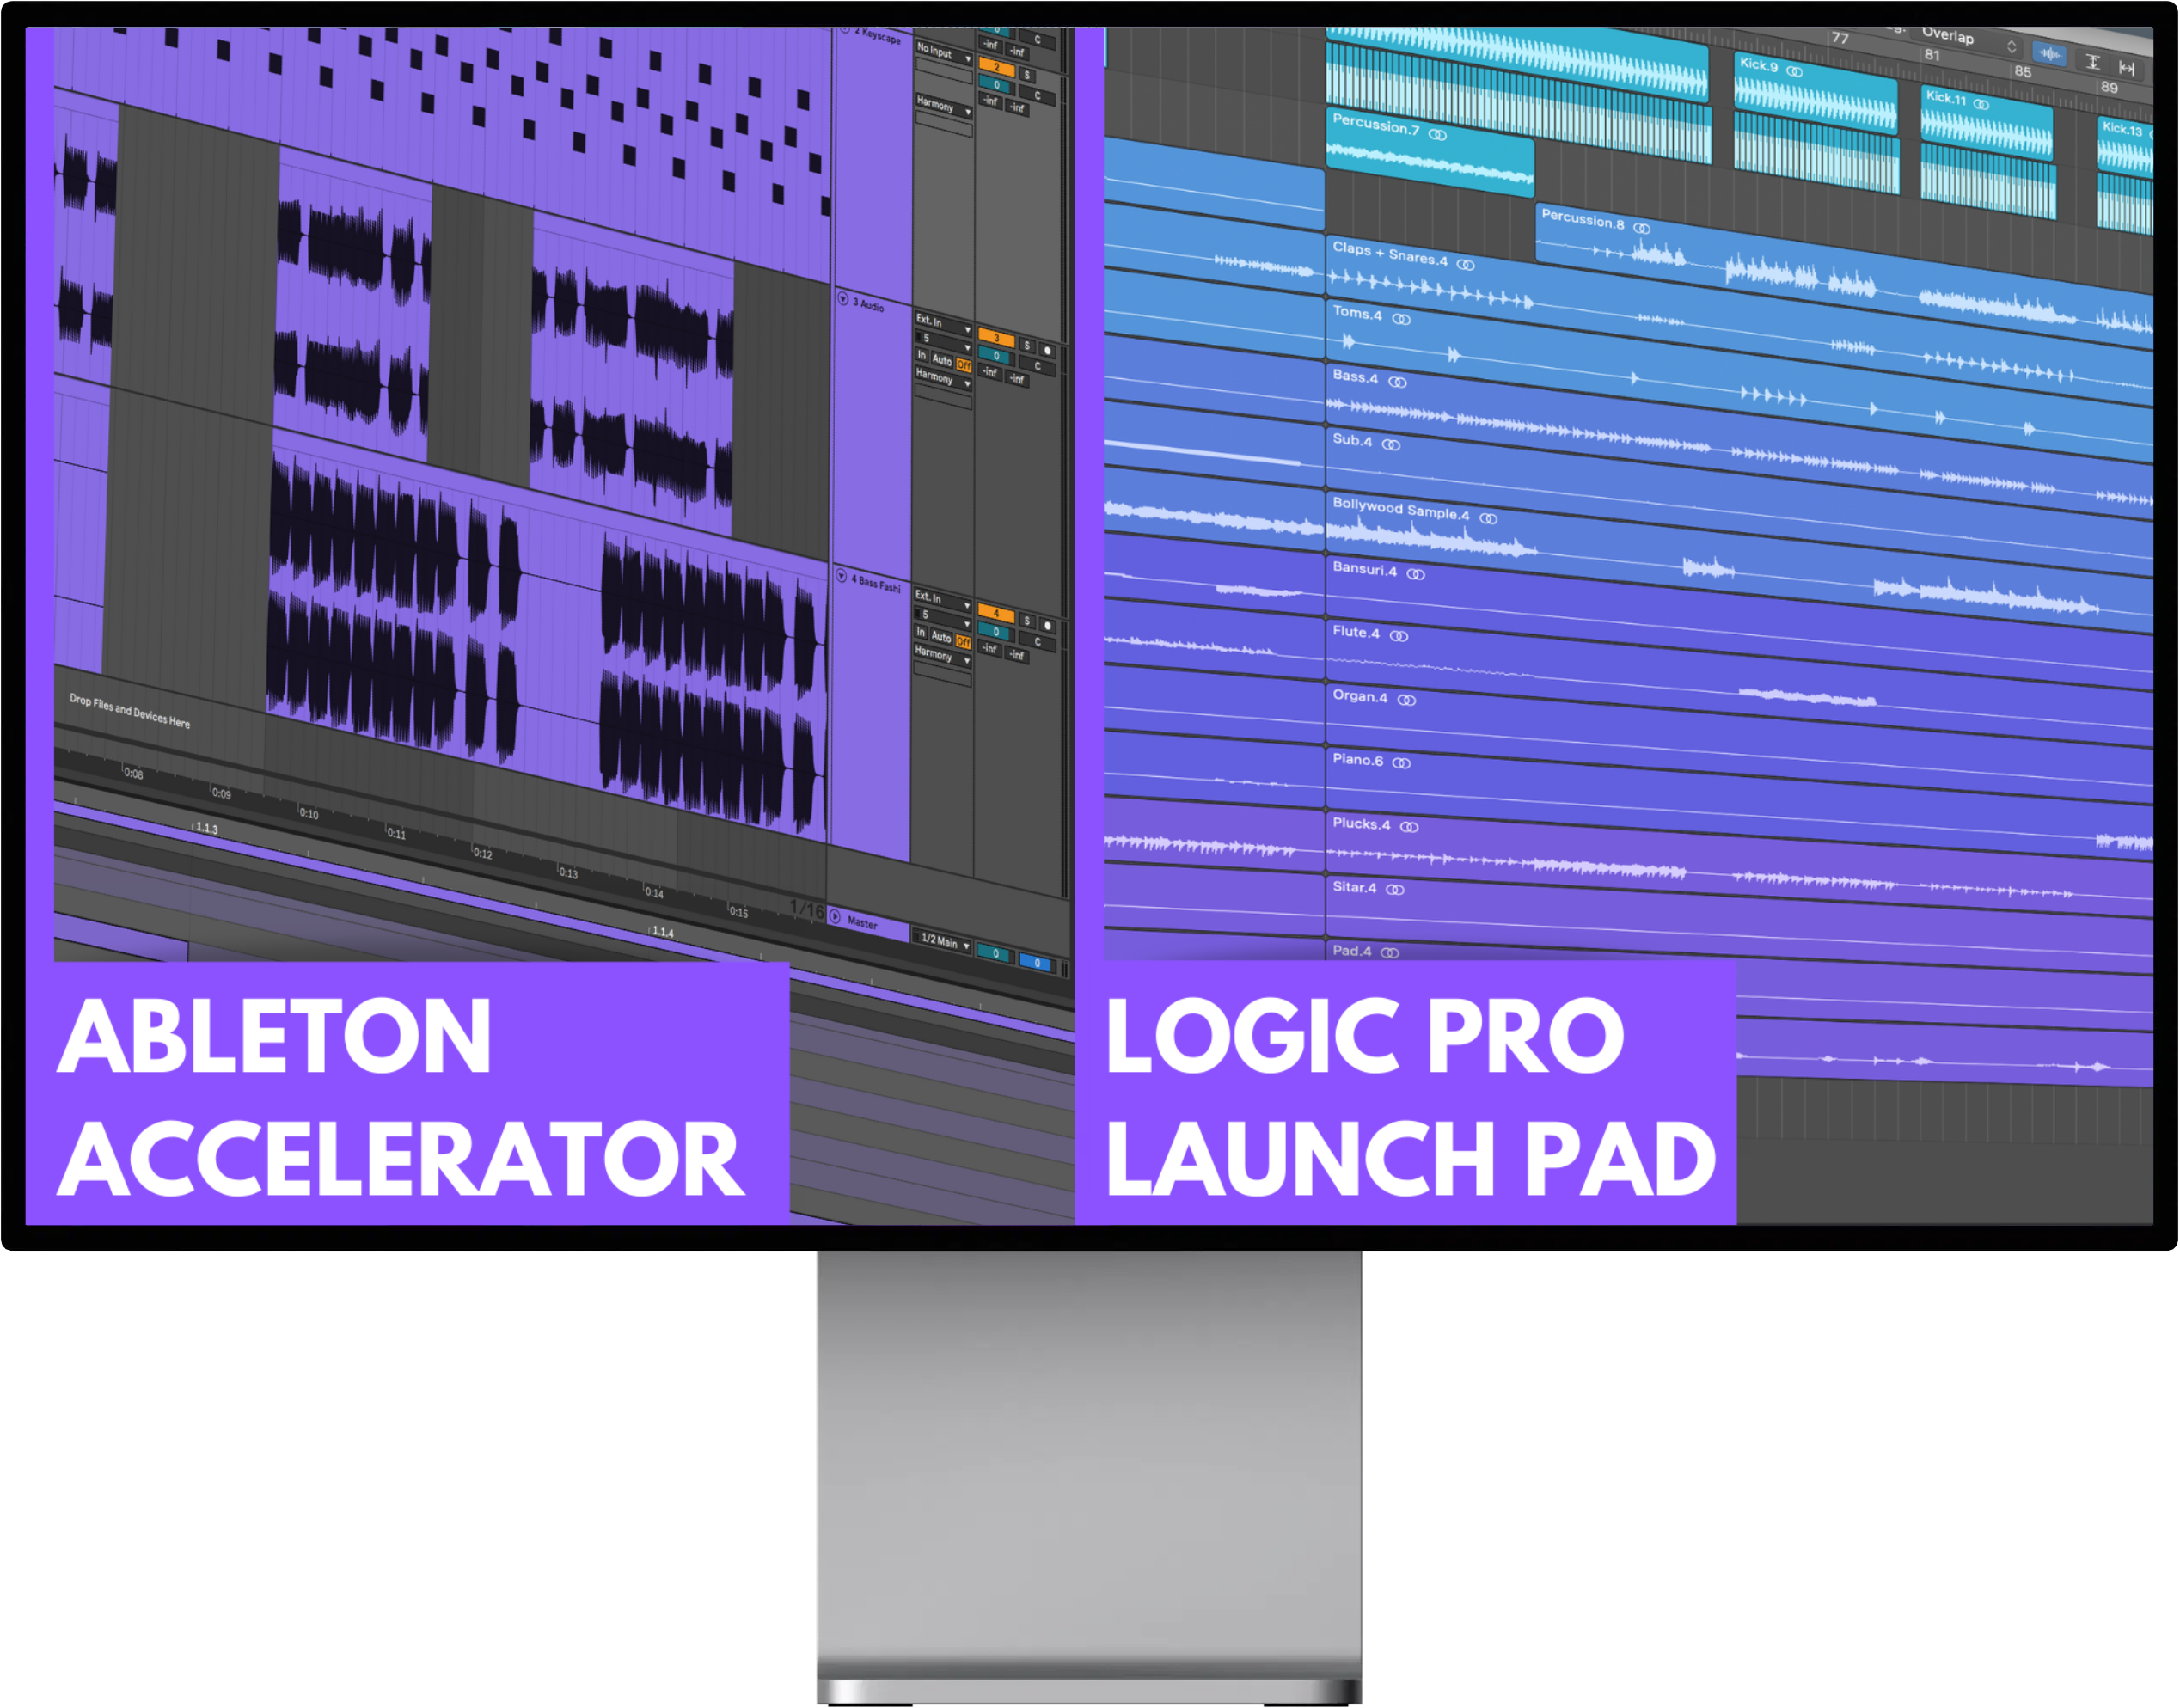 Ableton Accelerator and Logic Pro Launch Pad course logos on desktop display